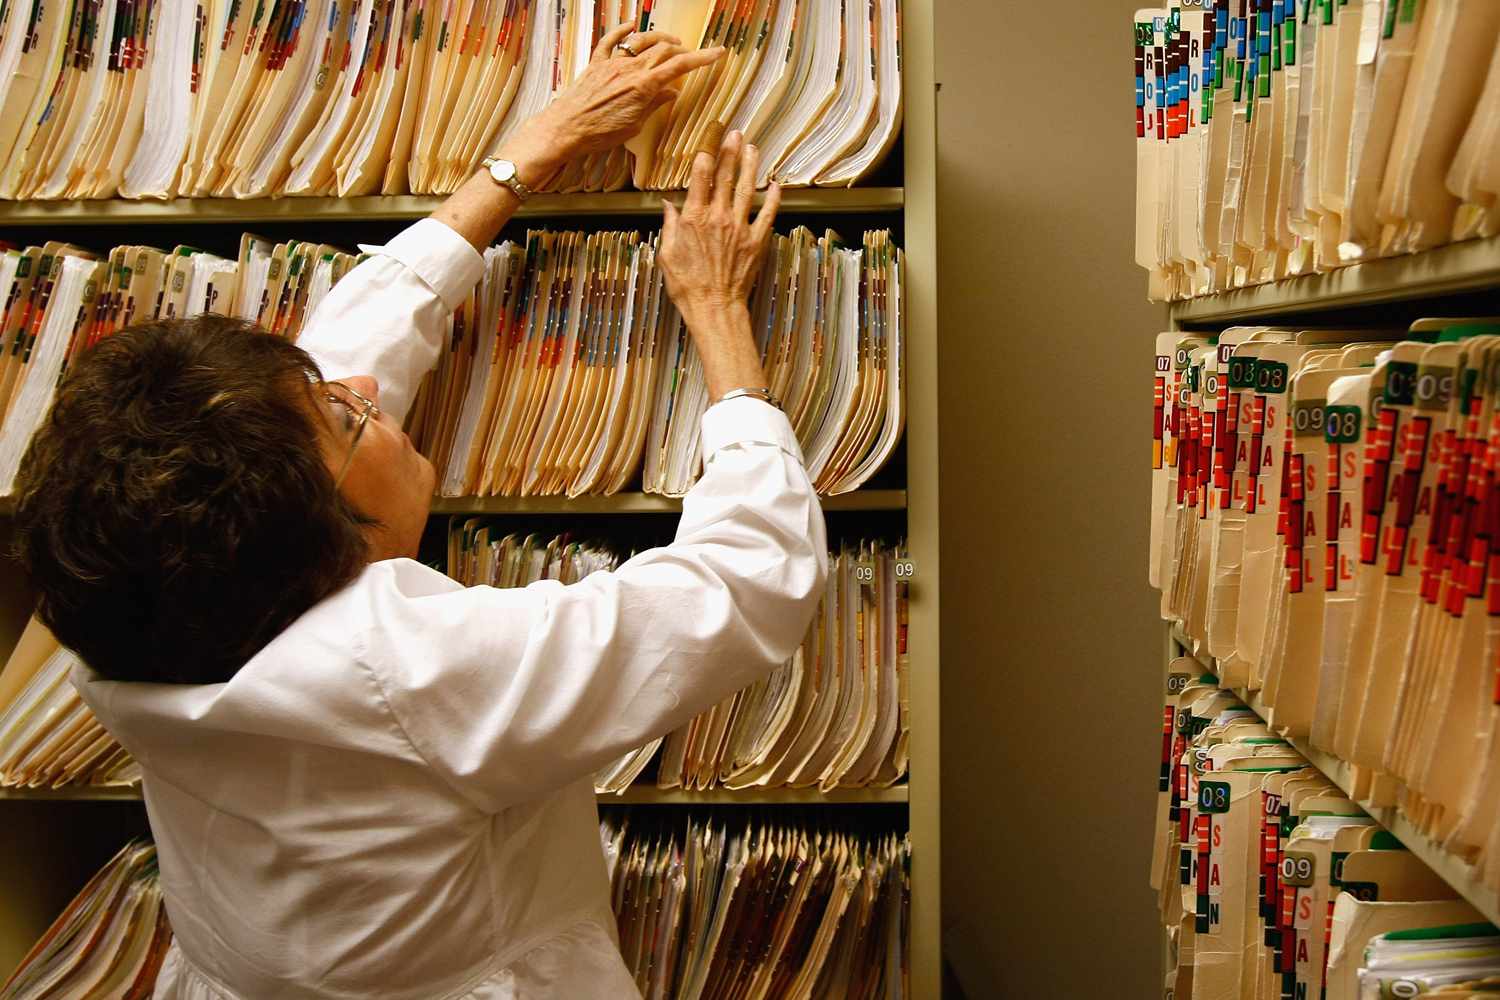 how can i get medical records from 20 years ago